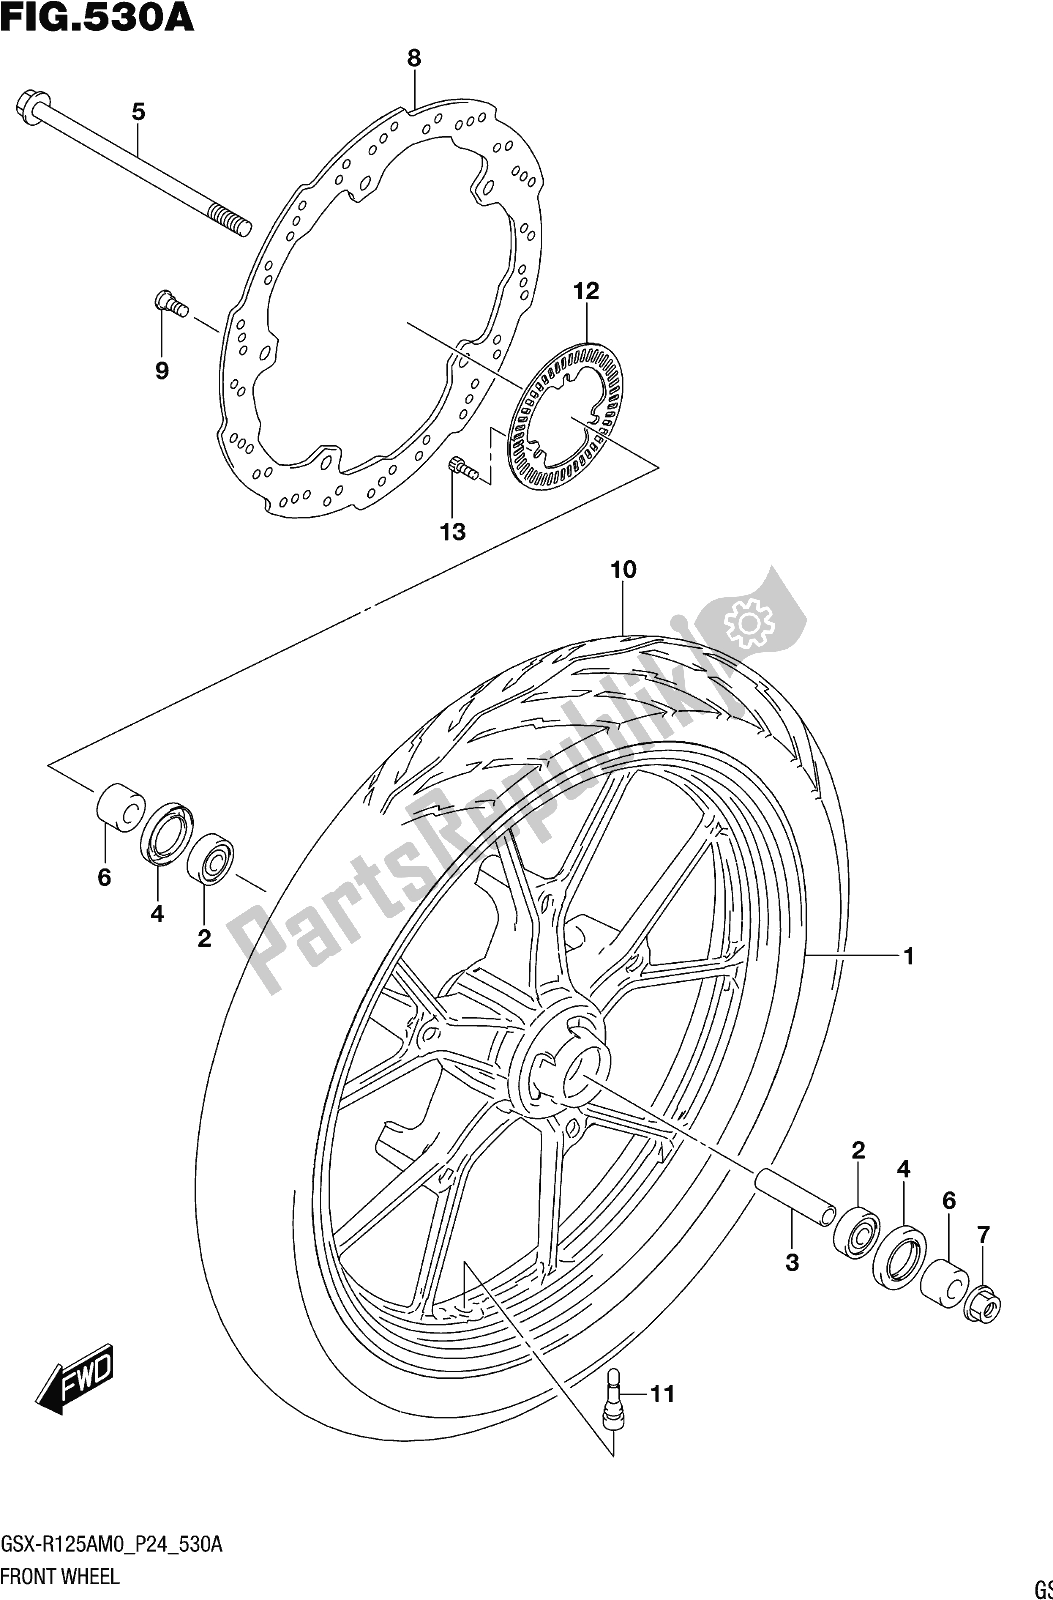 All parts for the Fig. 530a Front Wheel of the Suzuki Gsx-r 125A 2020